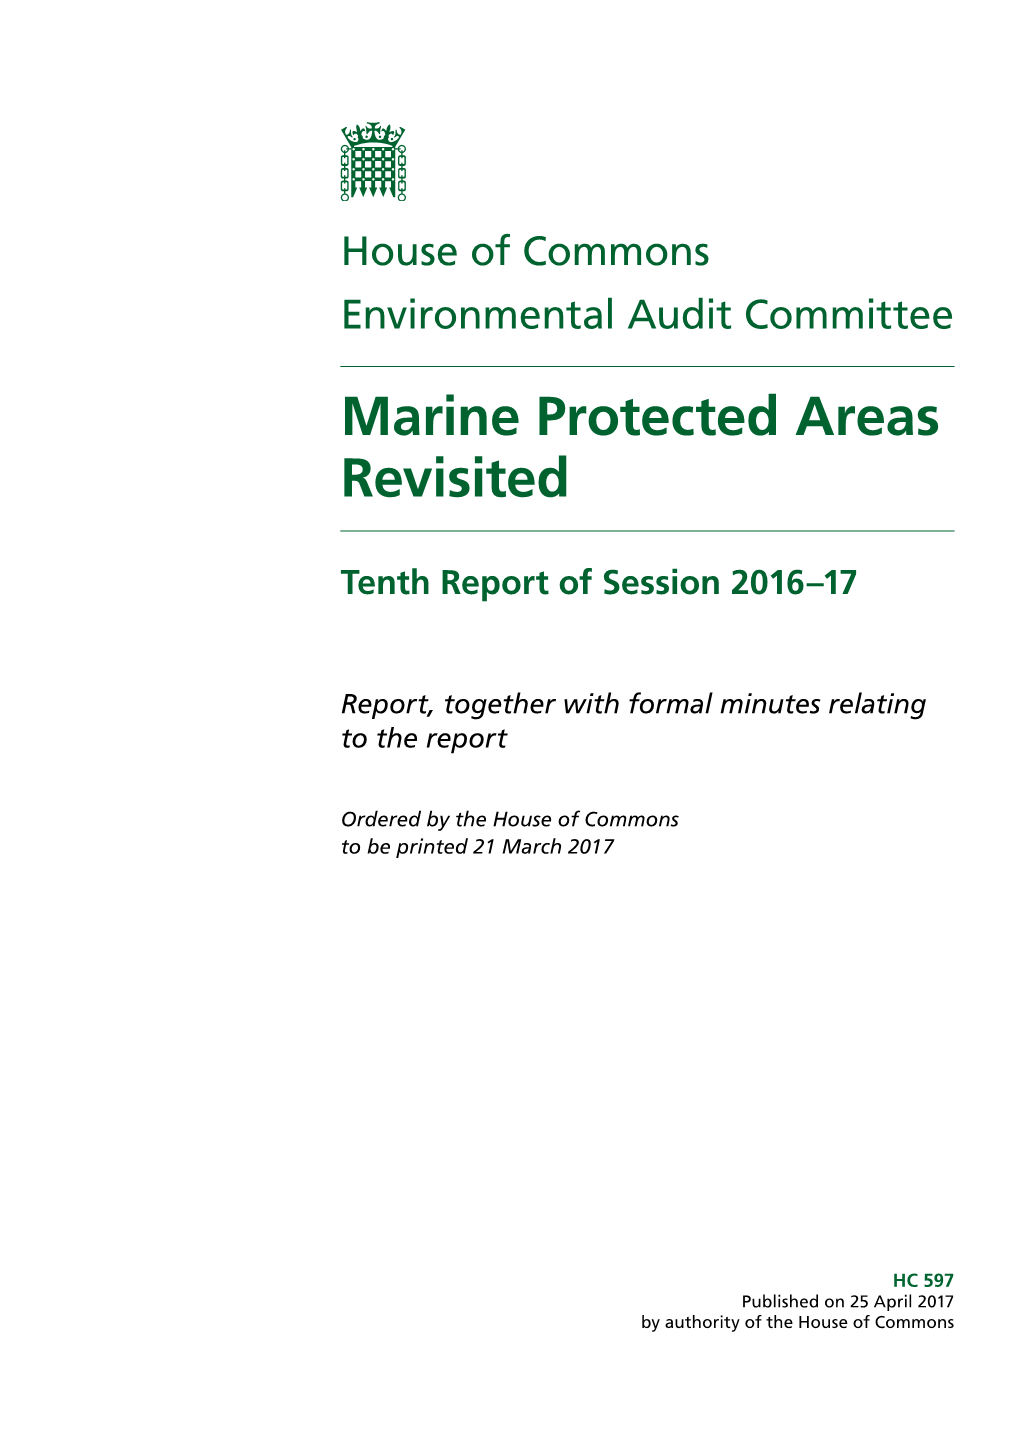 Marine Protected Areas Revisited